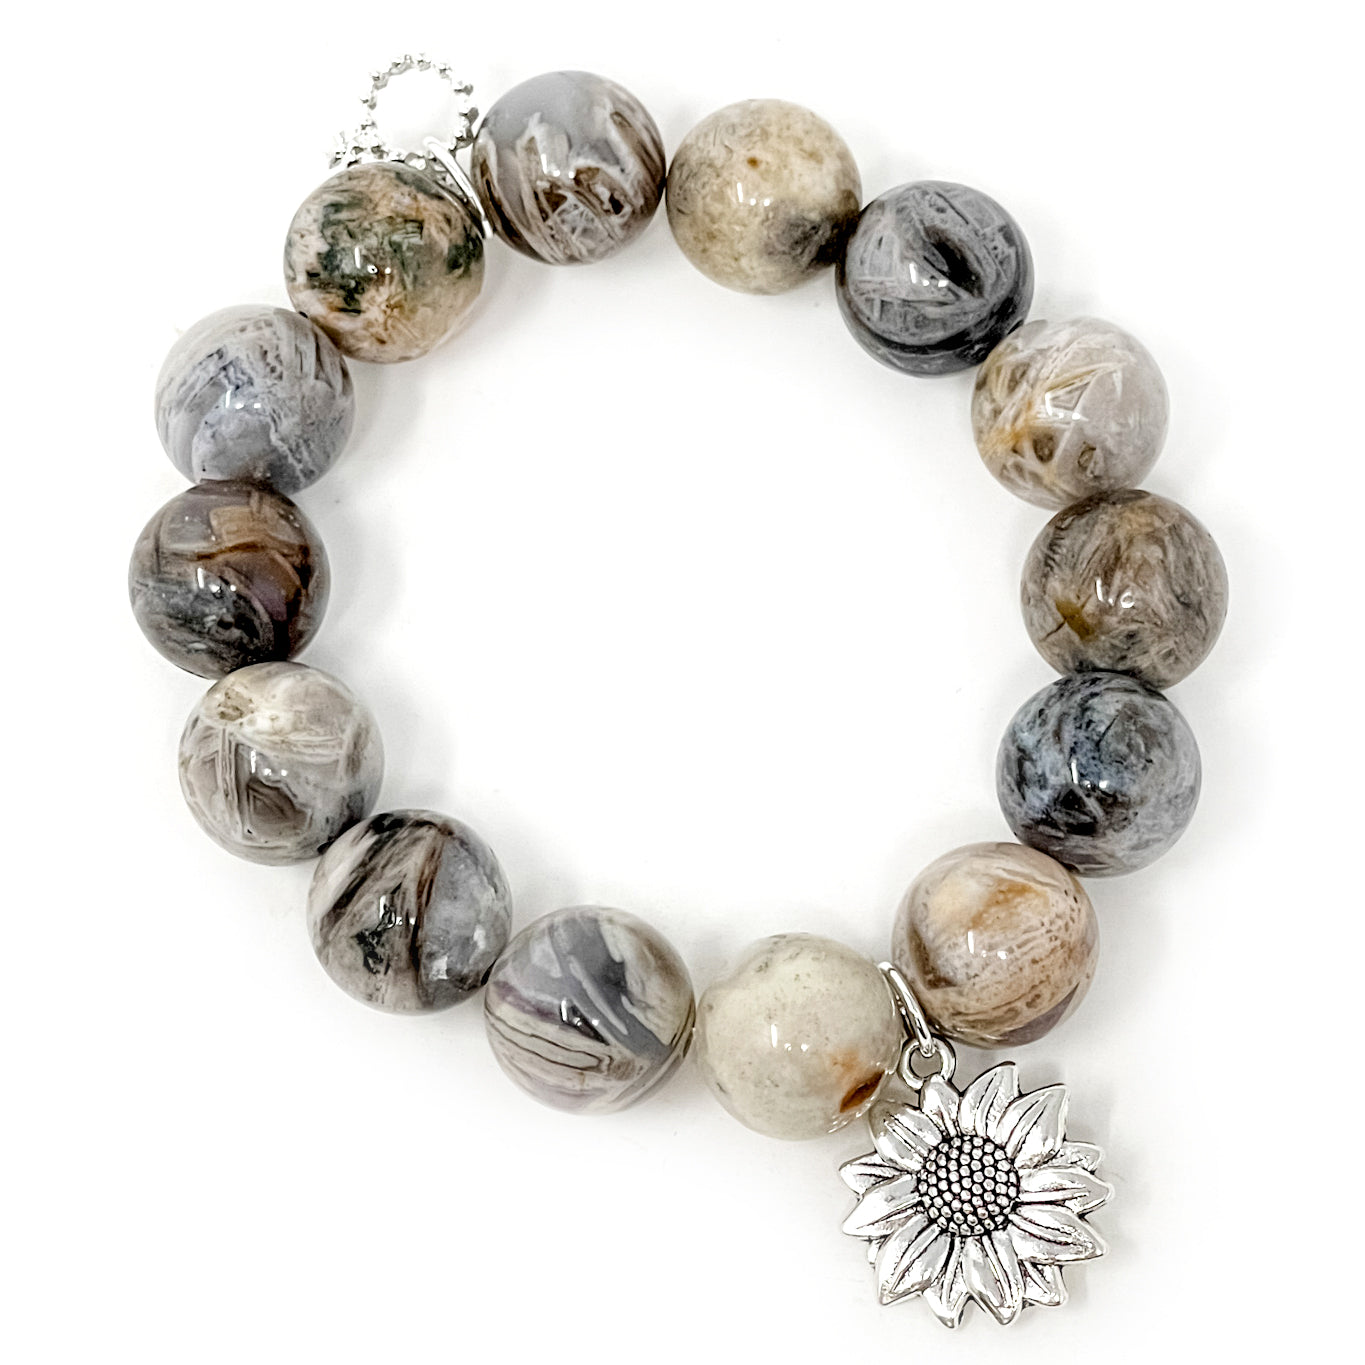 PowerBeads by jen Jewelry Average 7" Cathedral Agate with Silver Sunflower